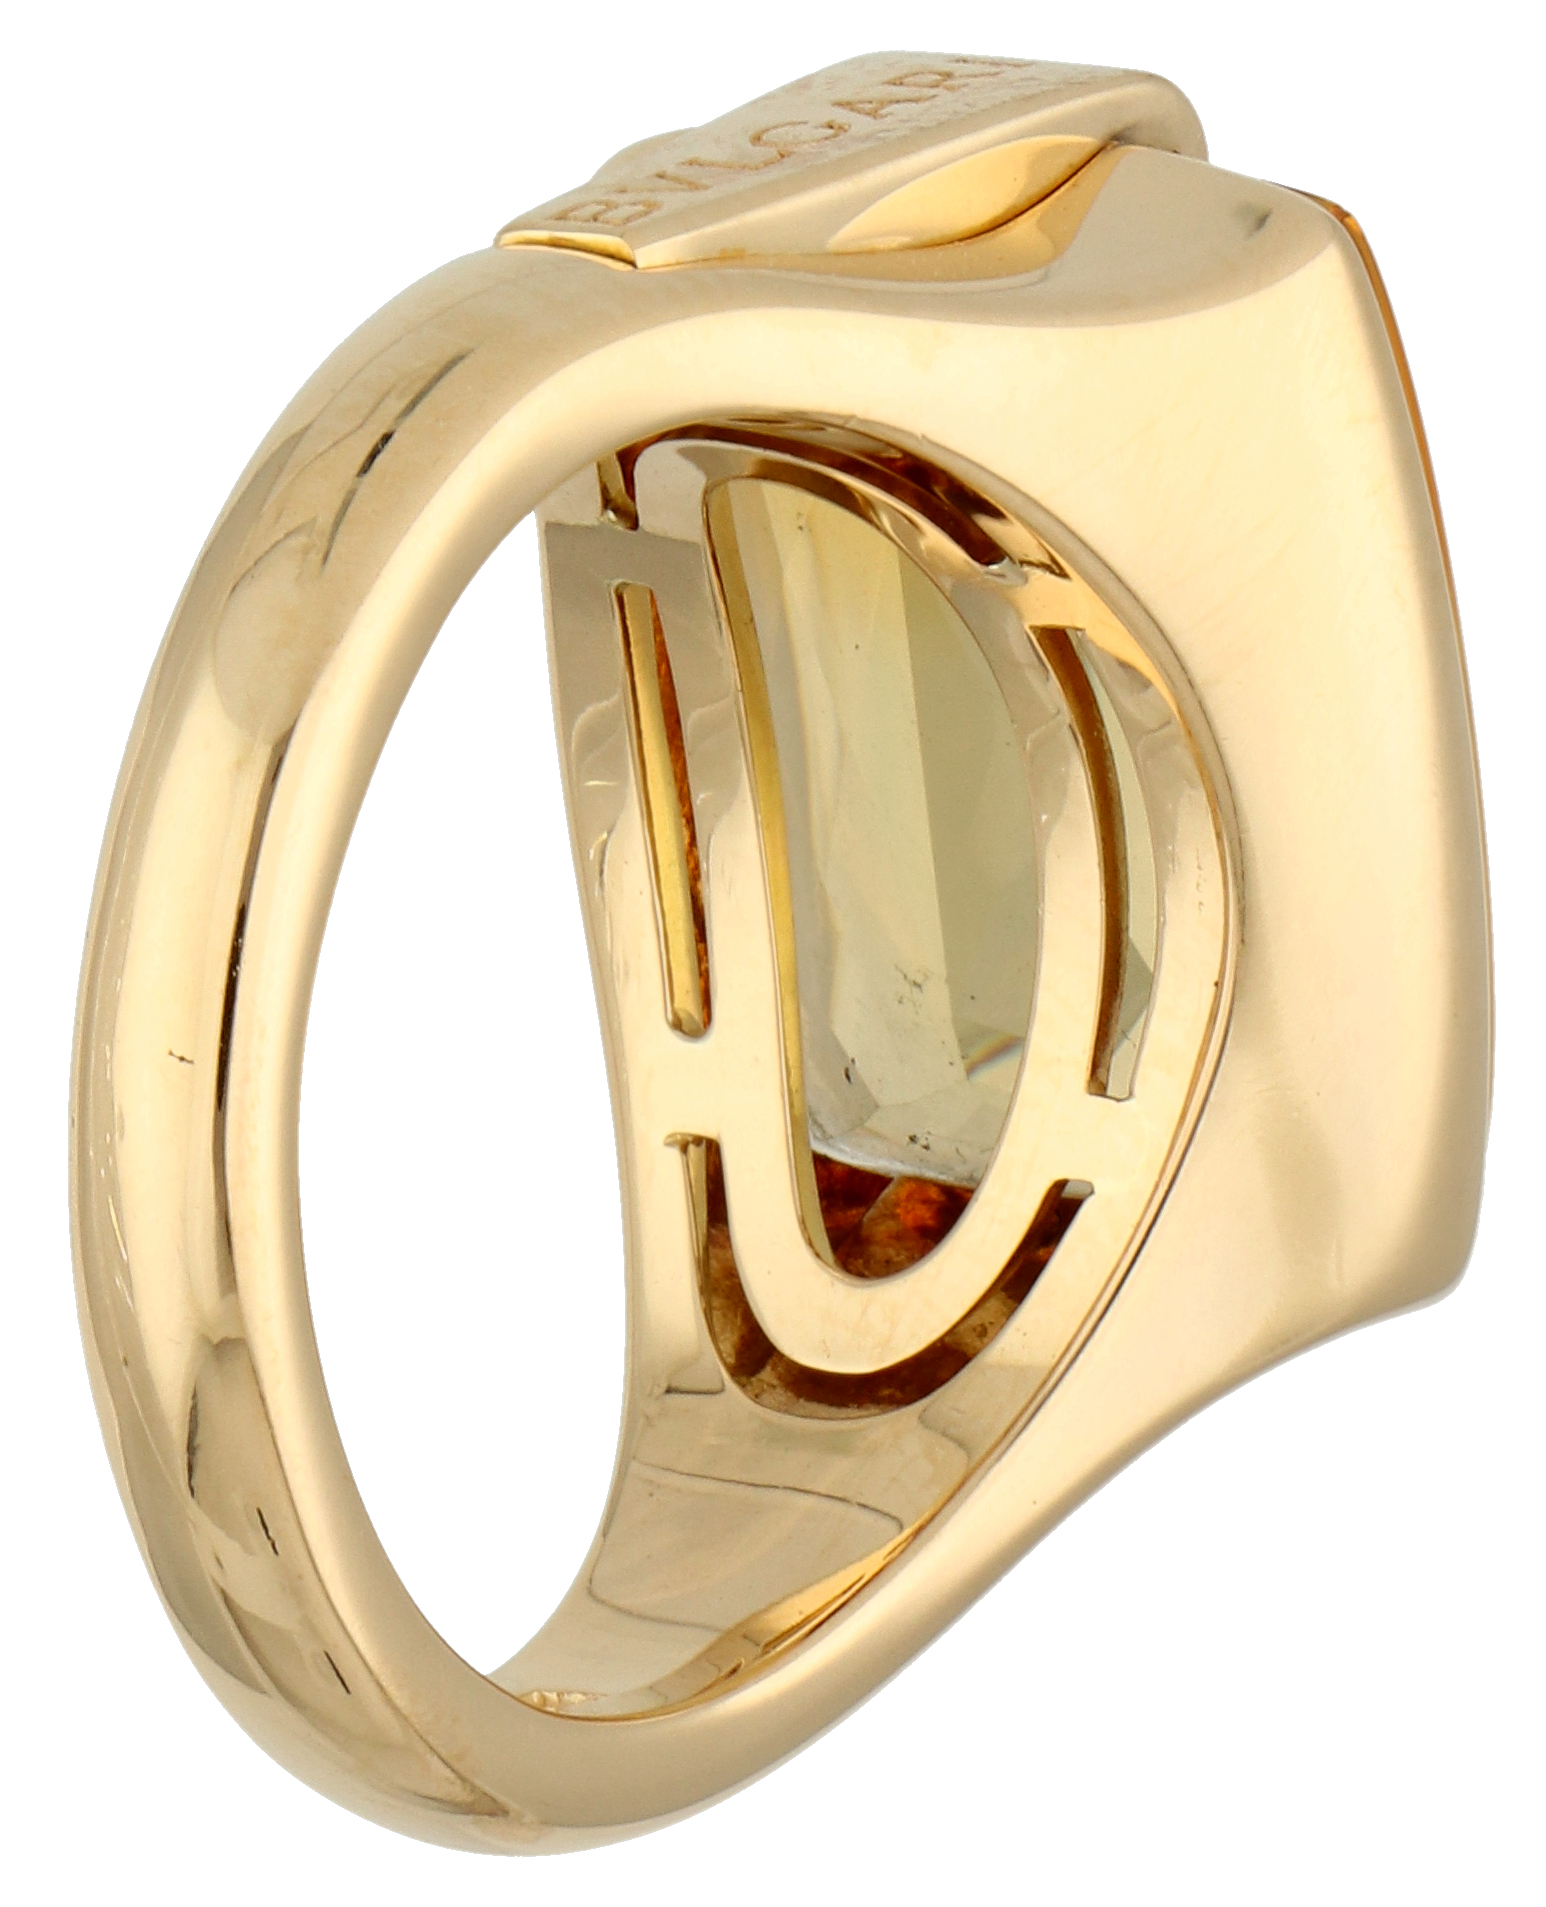 No Reserve - Bvlgari 18K yellow gold 'Allegra' ring set with approx. 9.13 ct. citrine. - Image 2 of 4